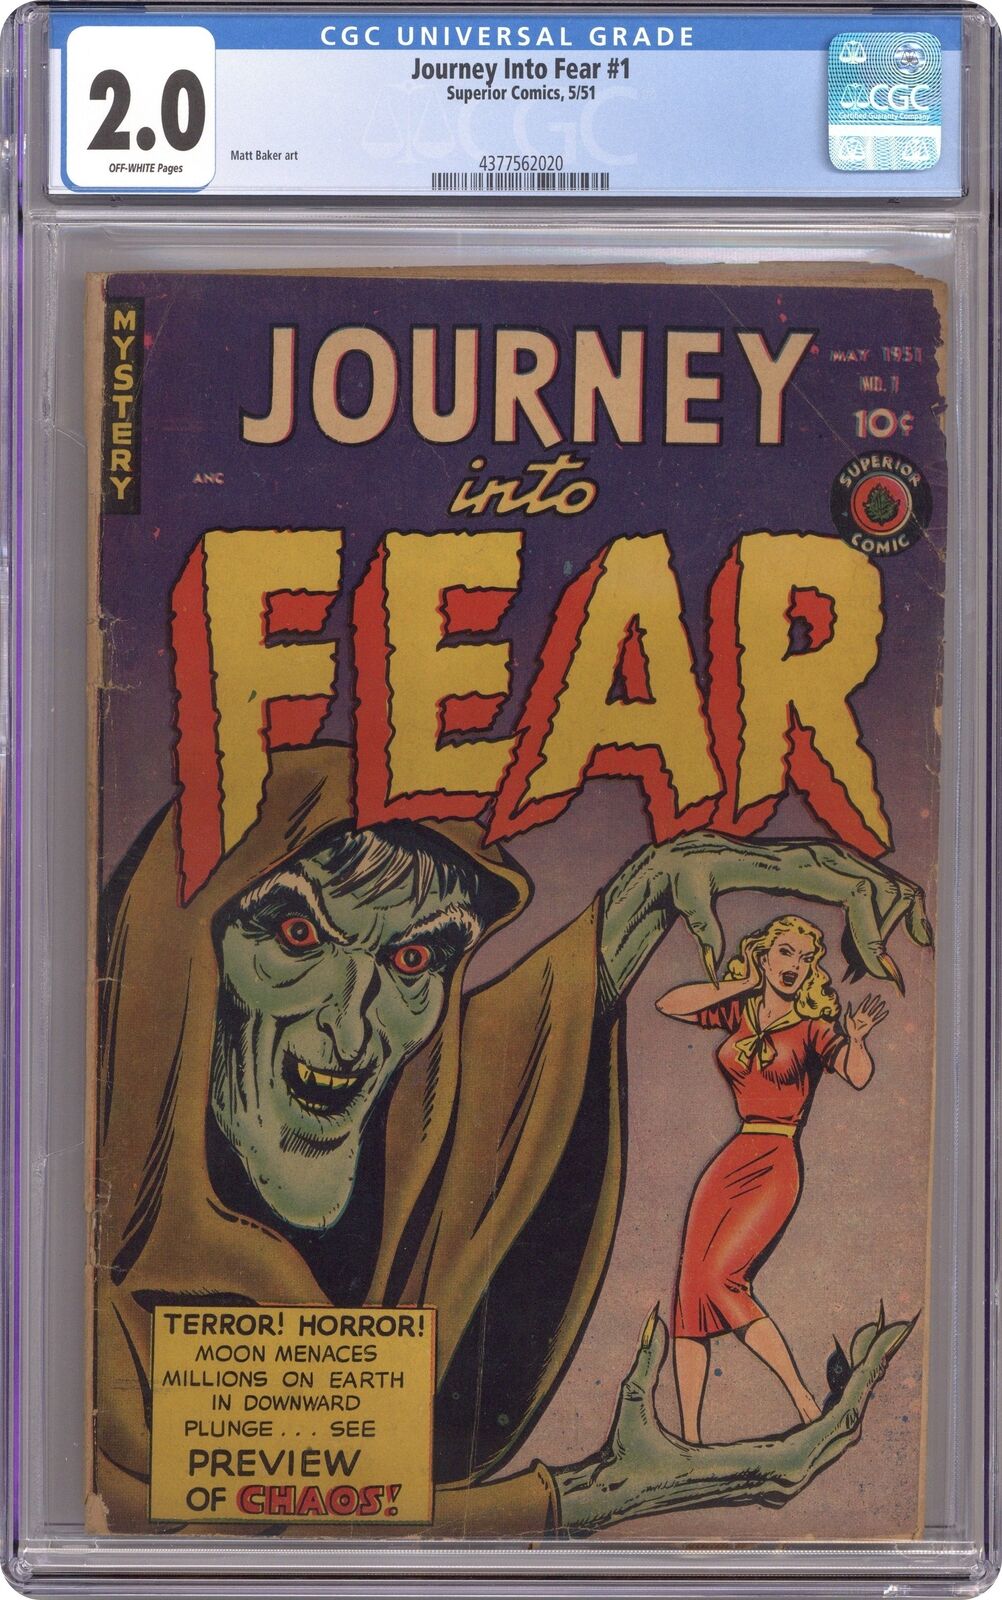 Journey into Fear #1 CGC 2.0 1951 4377562020